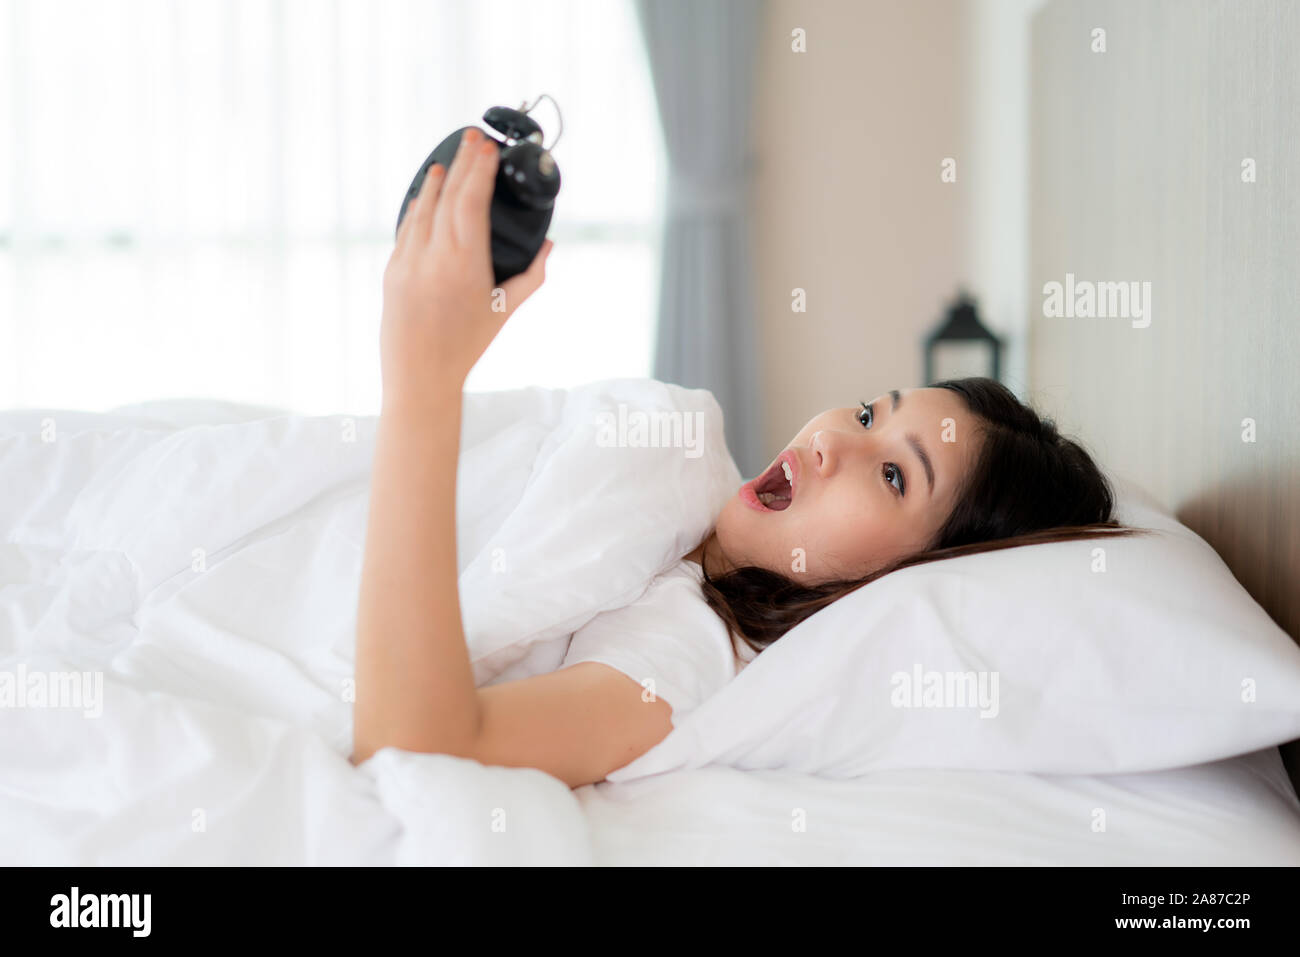 Beautyful Asian Woman lying on white bed and holding black alarm clock with shock to learn that late in morning at bedroom at home. Stock Photo